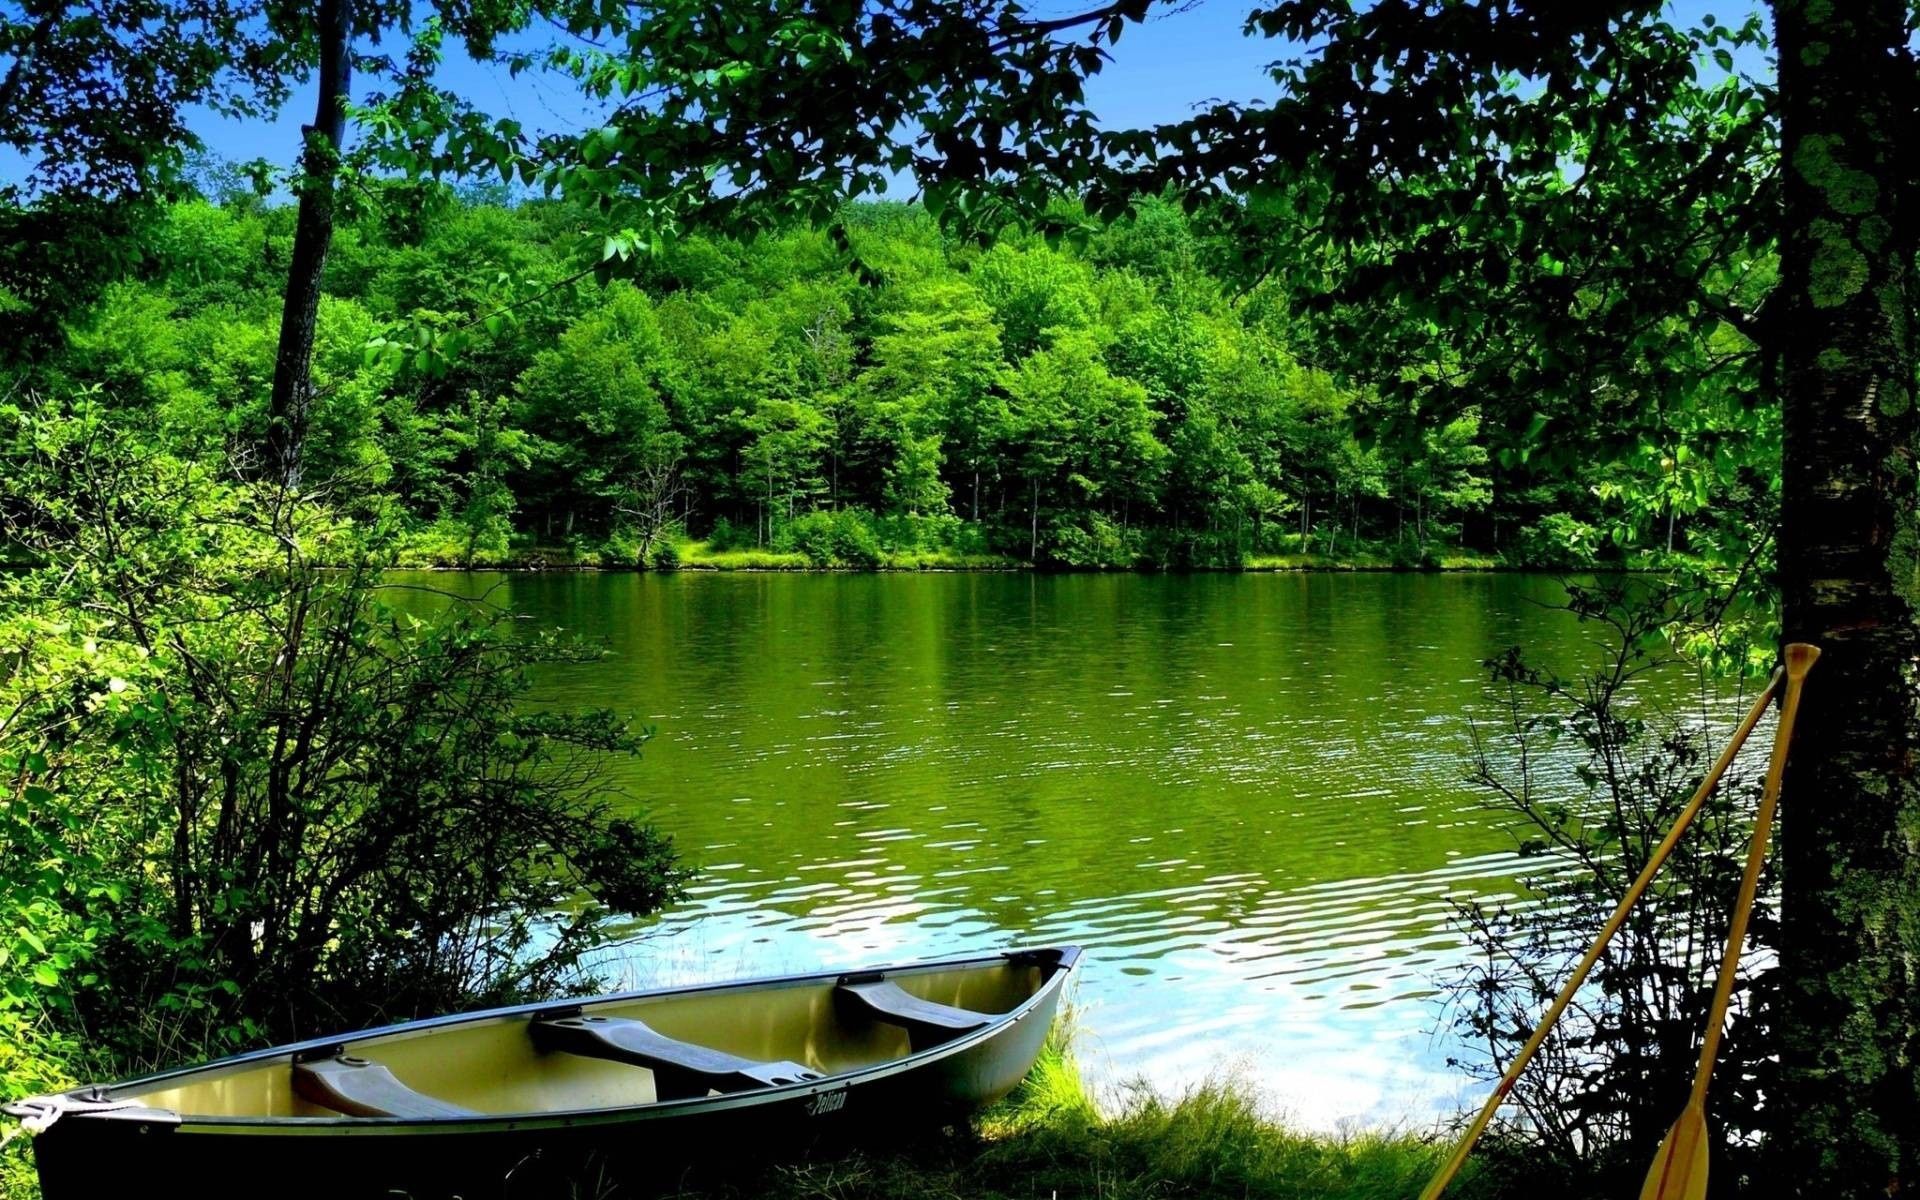 nature, boat, water, trees, oars, paddles